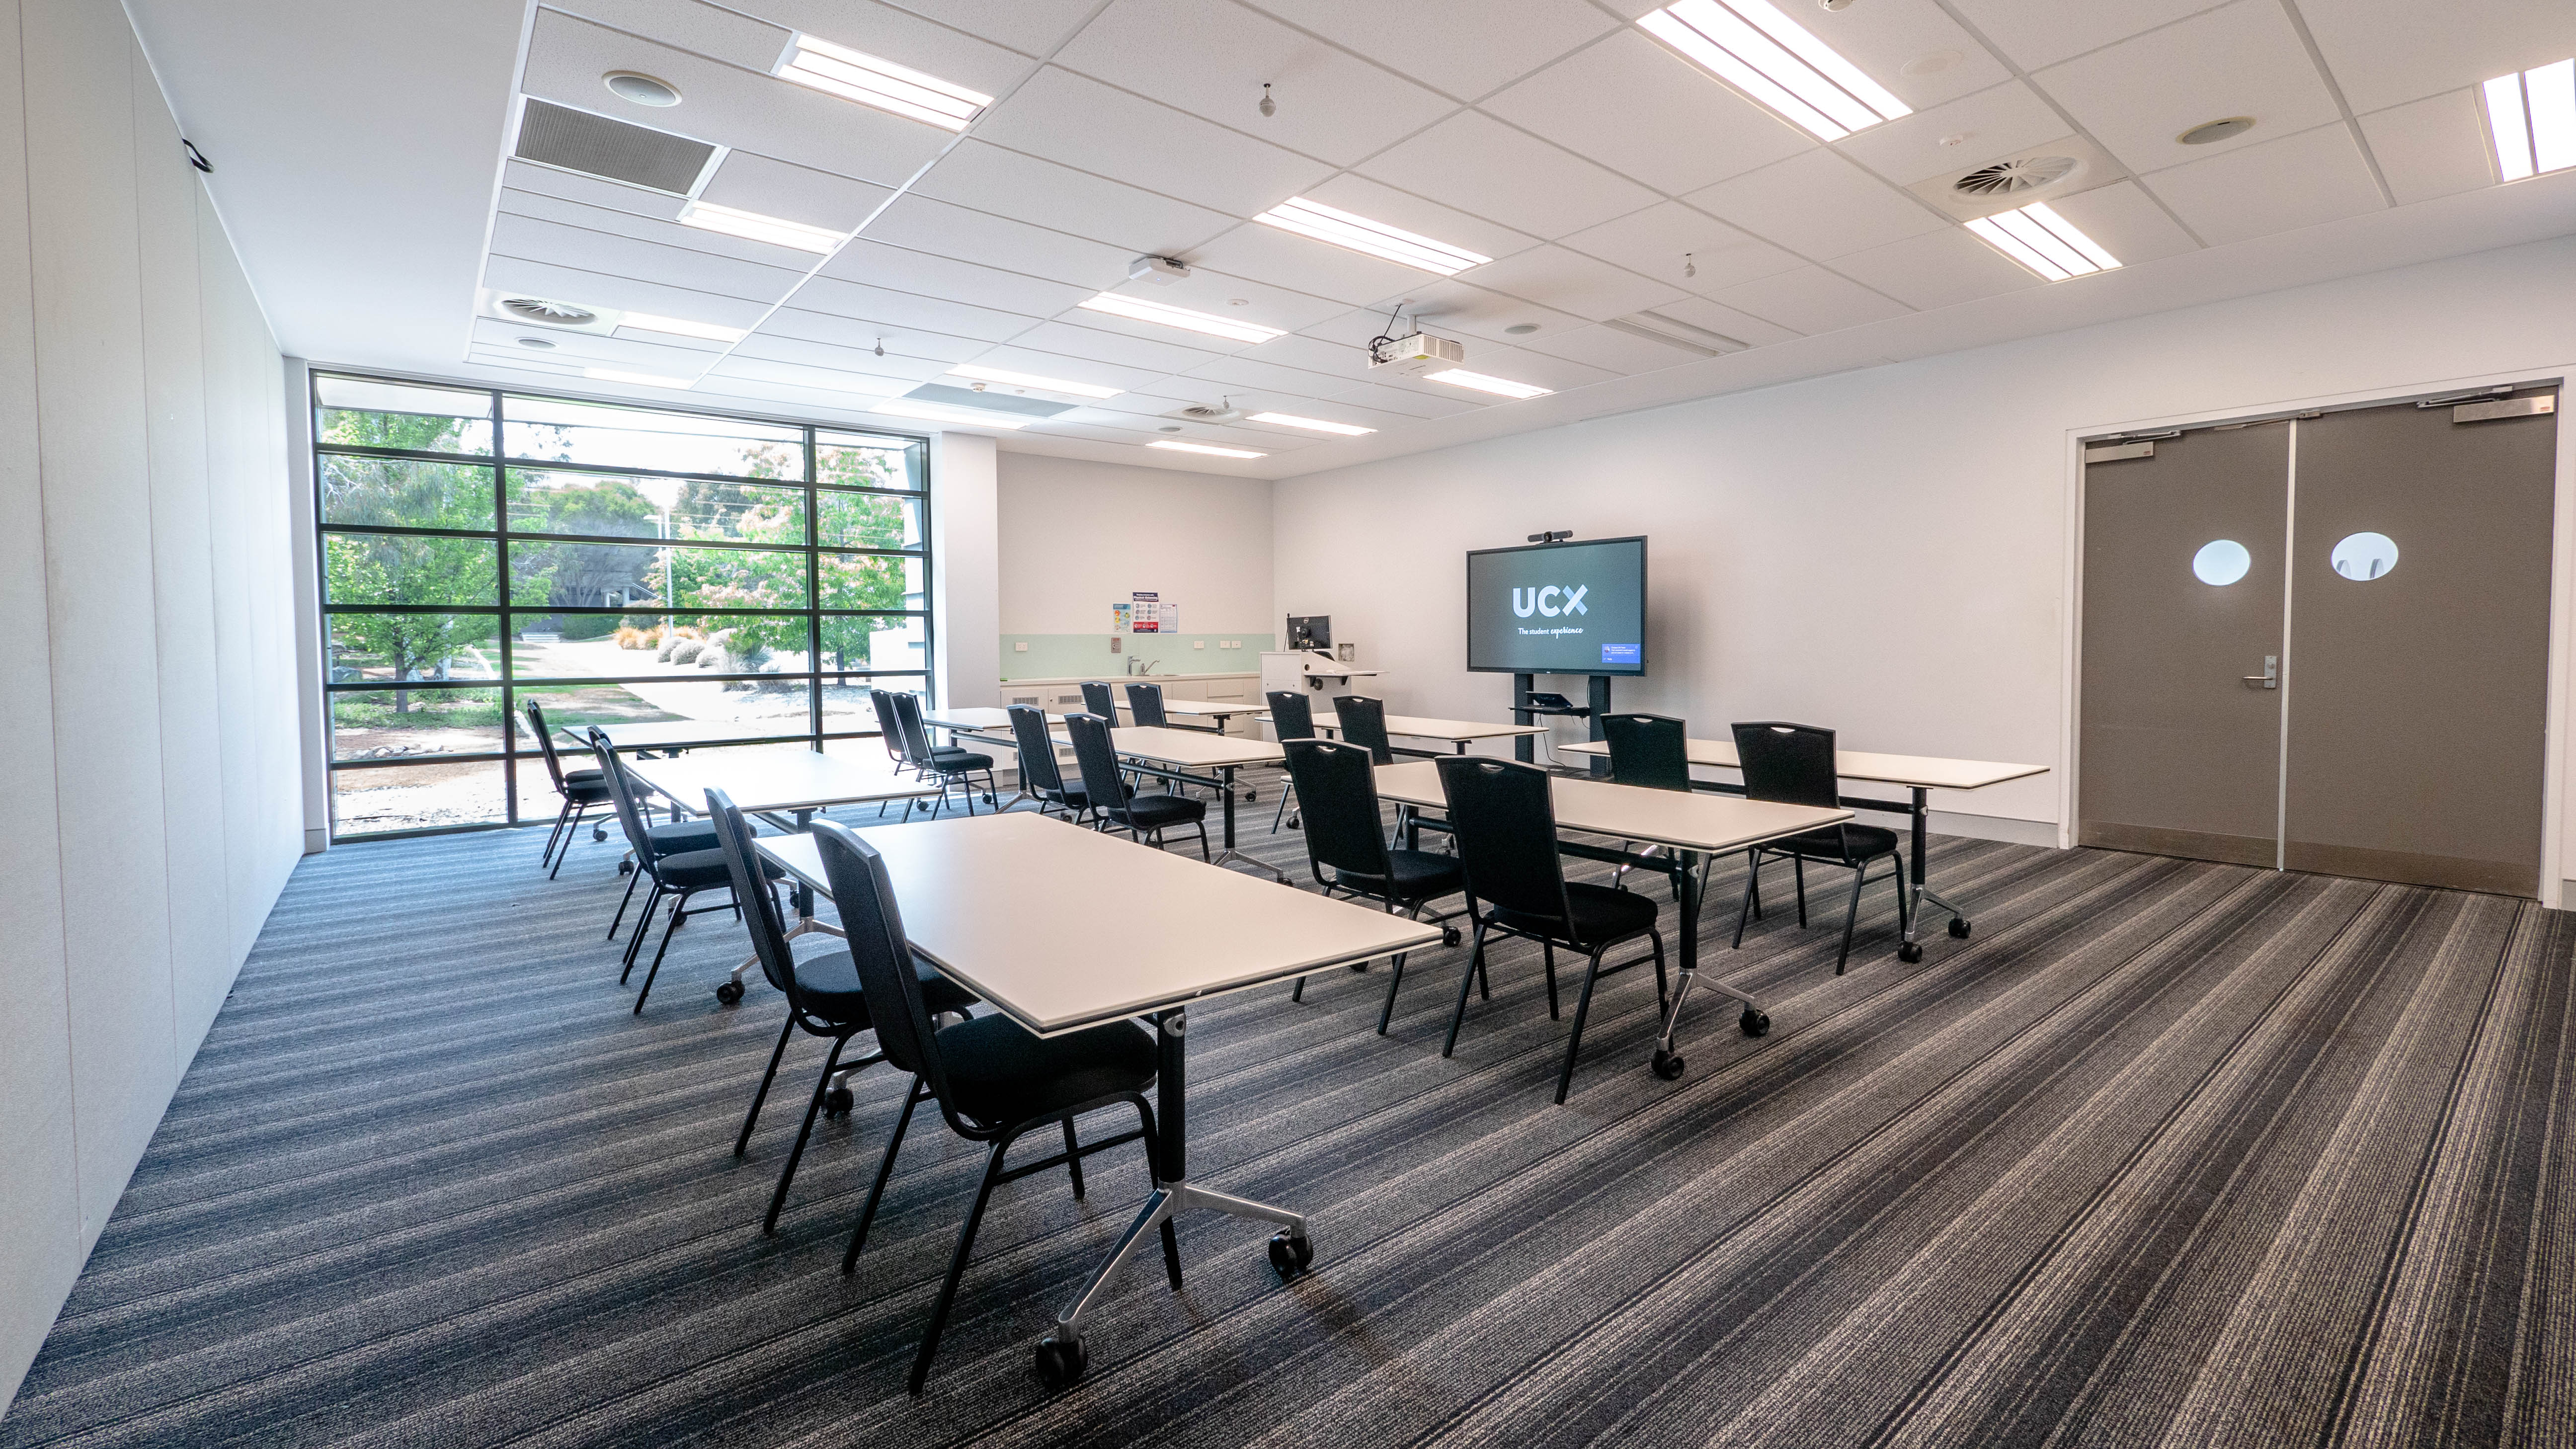 Ann Harding Conference Centre seminar room set up with blue chairs and tables in a classroom style. The chairs and tables face a television displaying the UCX logo